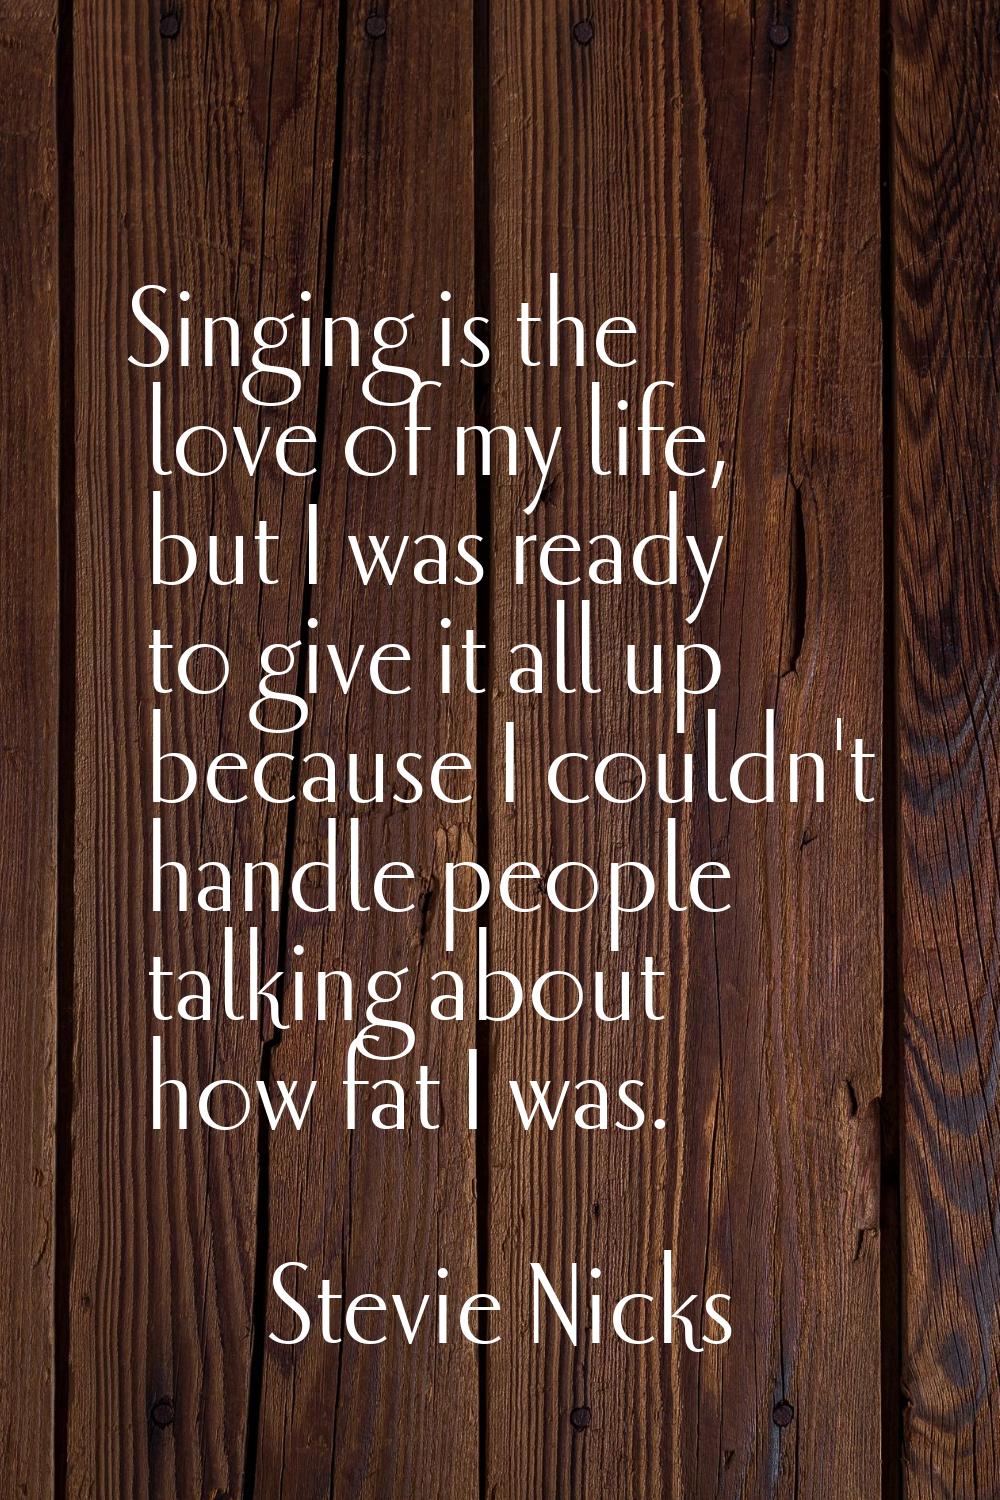 Singing is the love of my life, but I was ready to give it all up because I couldn't handle people 